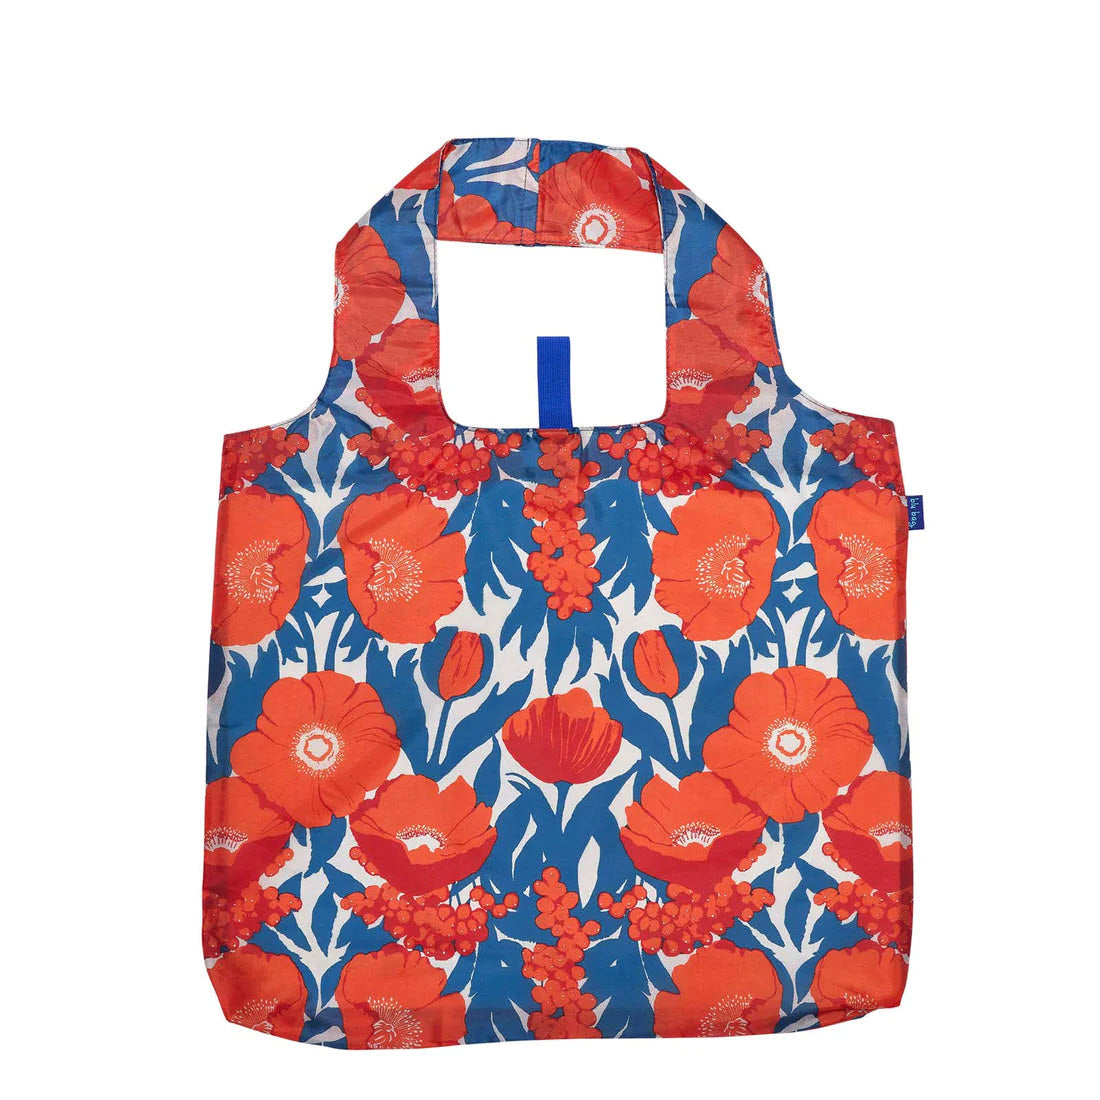 A BLU BAG ICELANDIC POPPIES from Rockflowerpaper featuring large red and blue poppies on an eco-friendly tote.